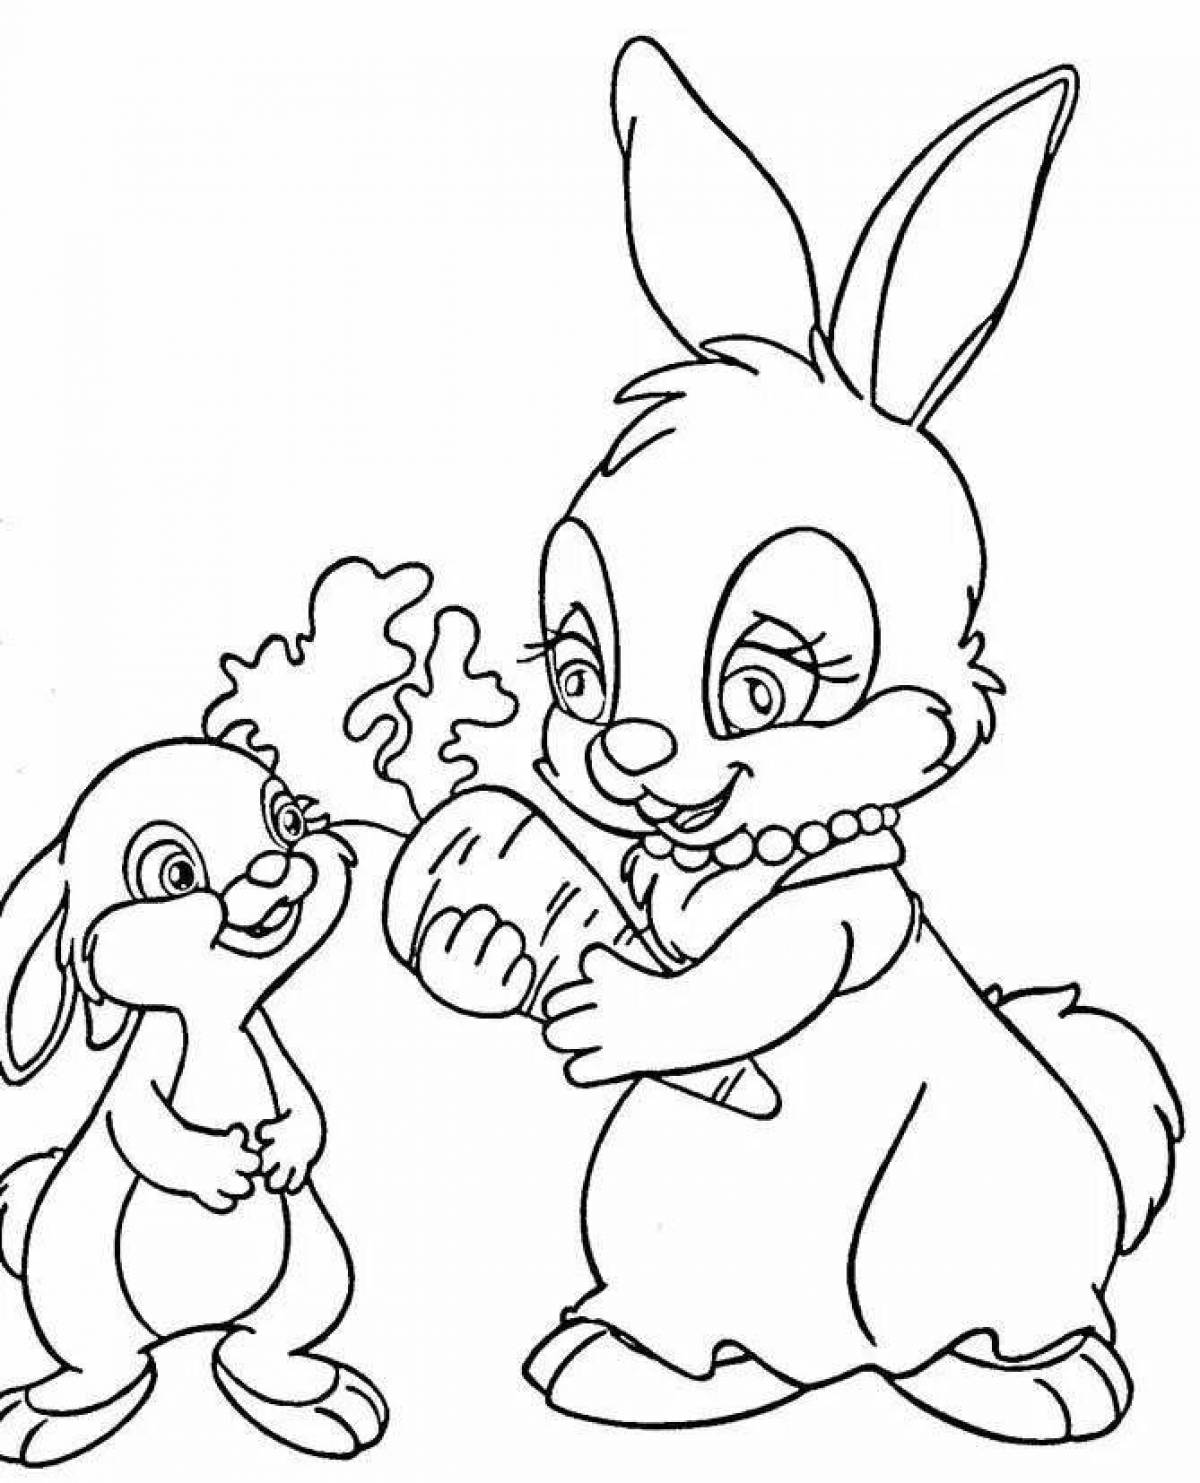 Colorful coloring draw coloring pages